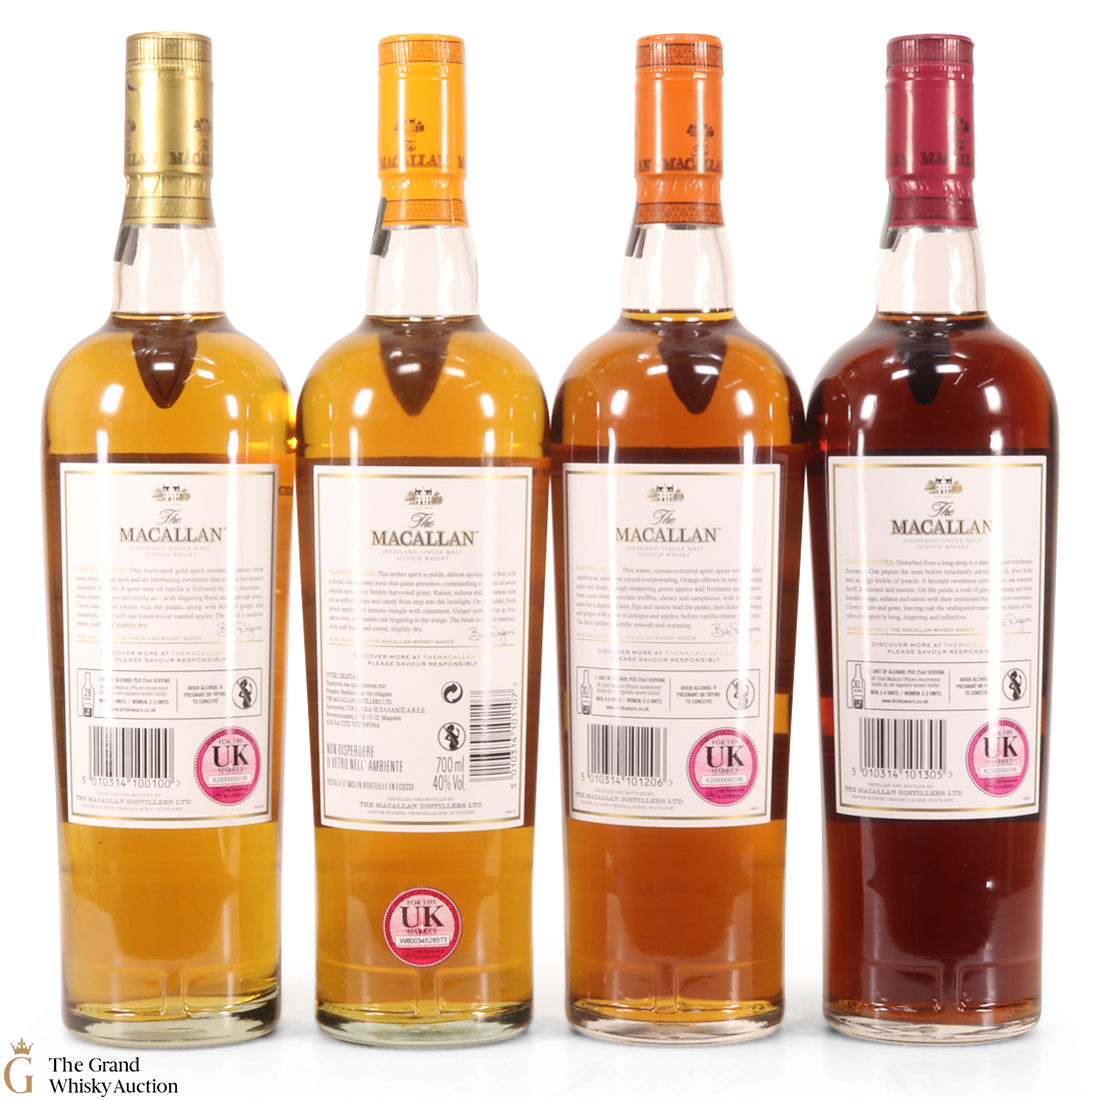 Macallan 1824 Series Gold Amber Sienna Ruby Auction The Grand Whisky Auction